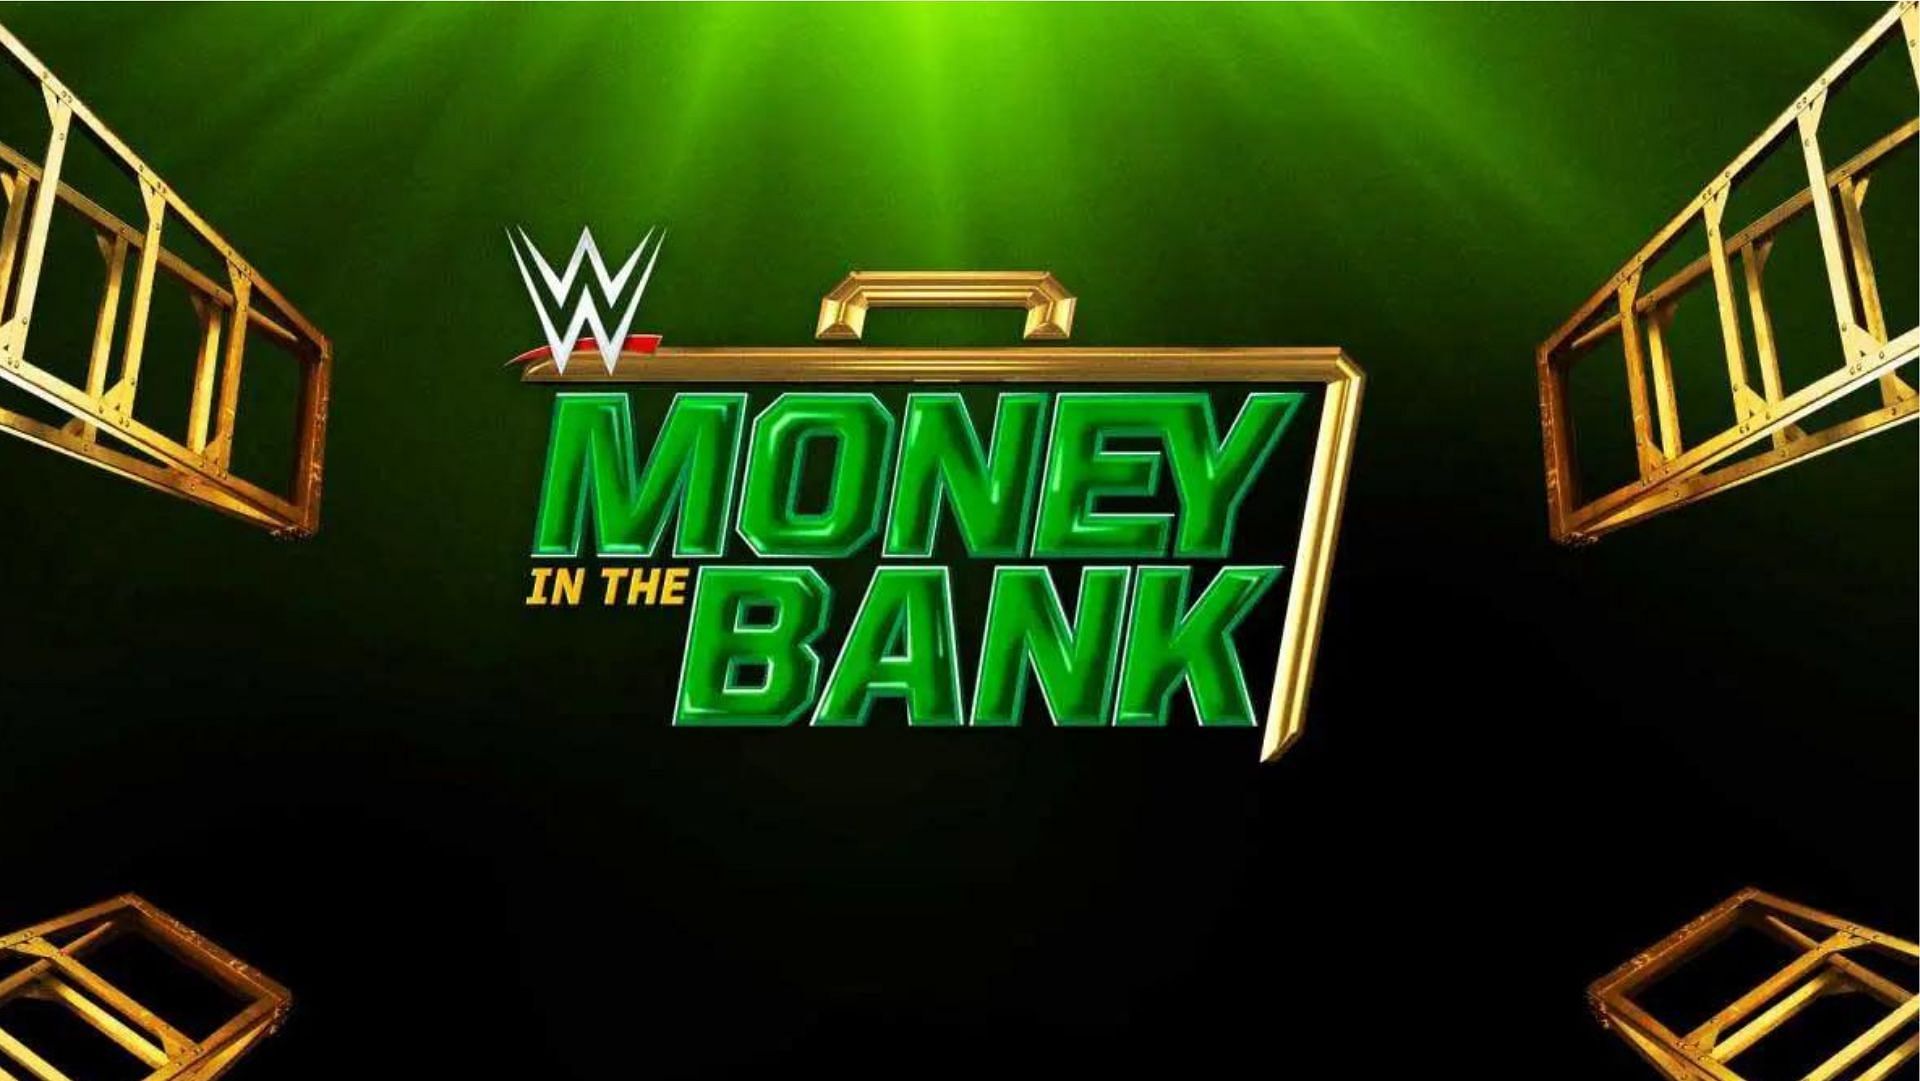 Money in the Bank is scheduled at O2 Arena in London in 2023.